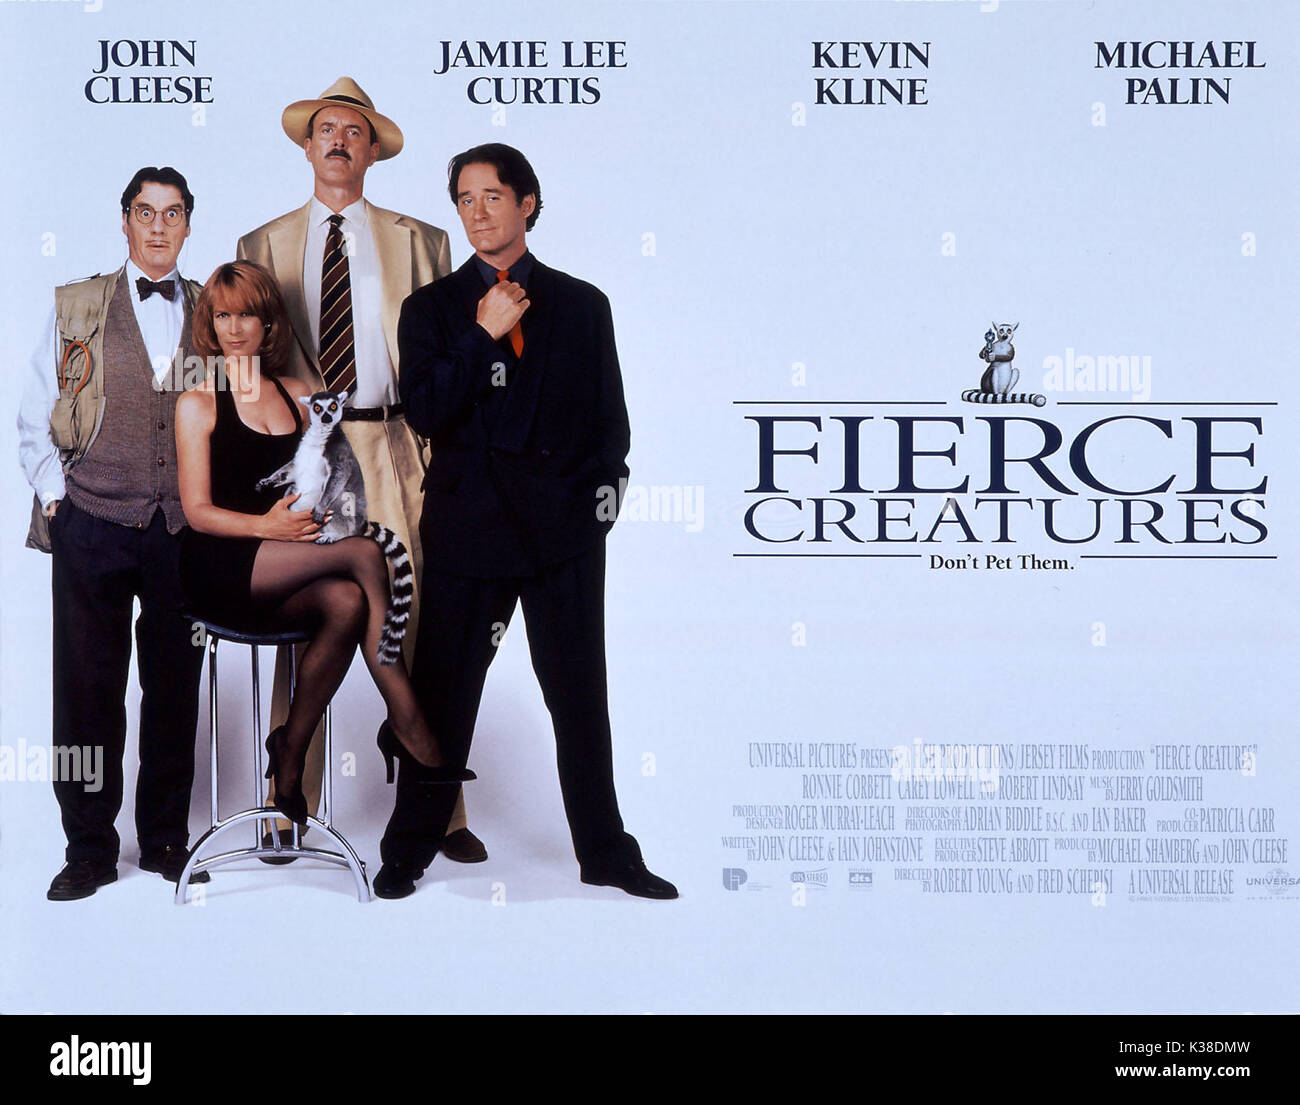 FIERCE CREATURES UNIVERSAL PICTURES     Date: 1995 Stock Photo